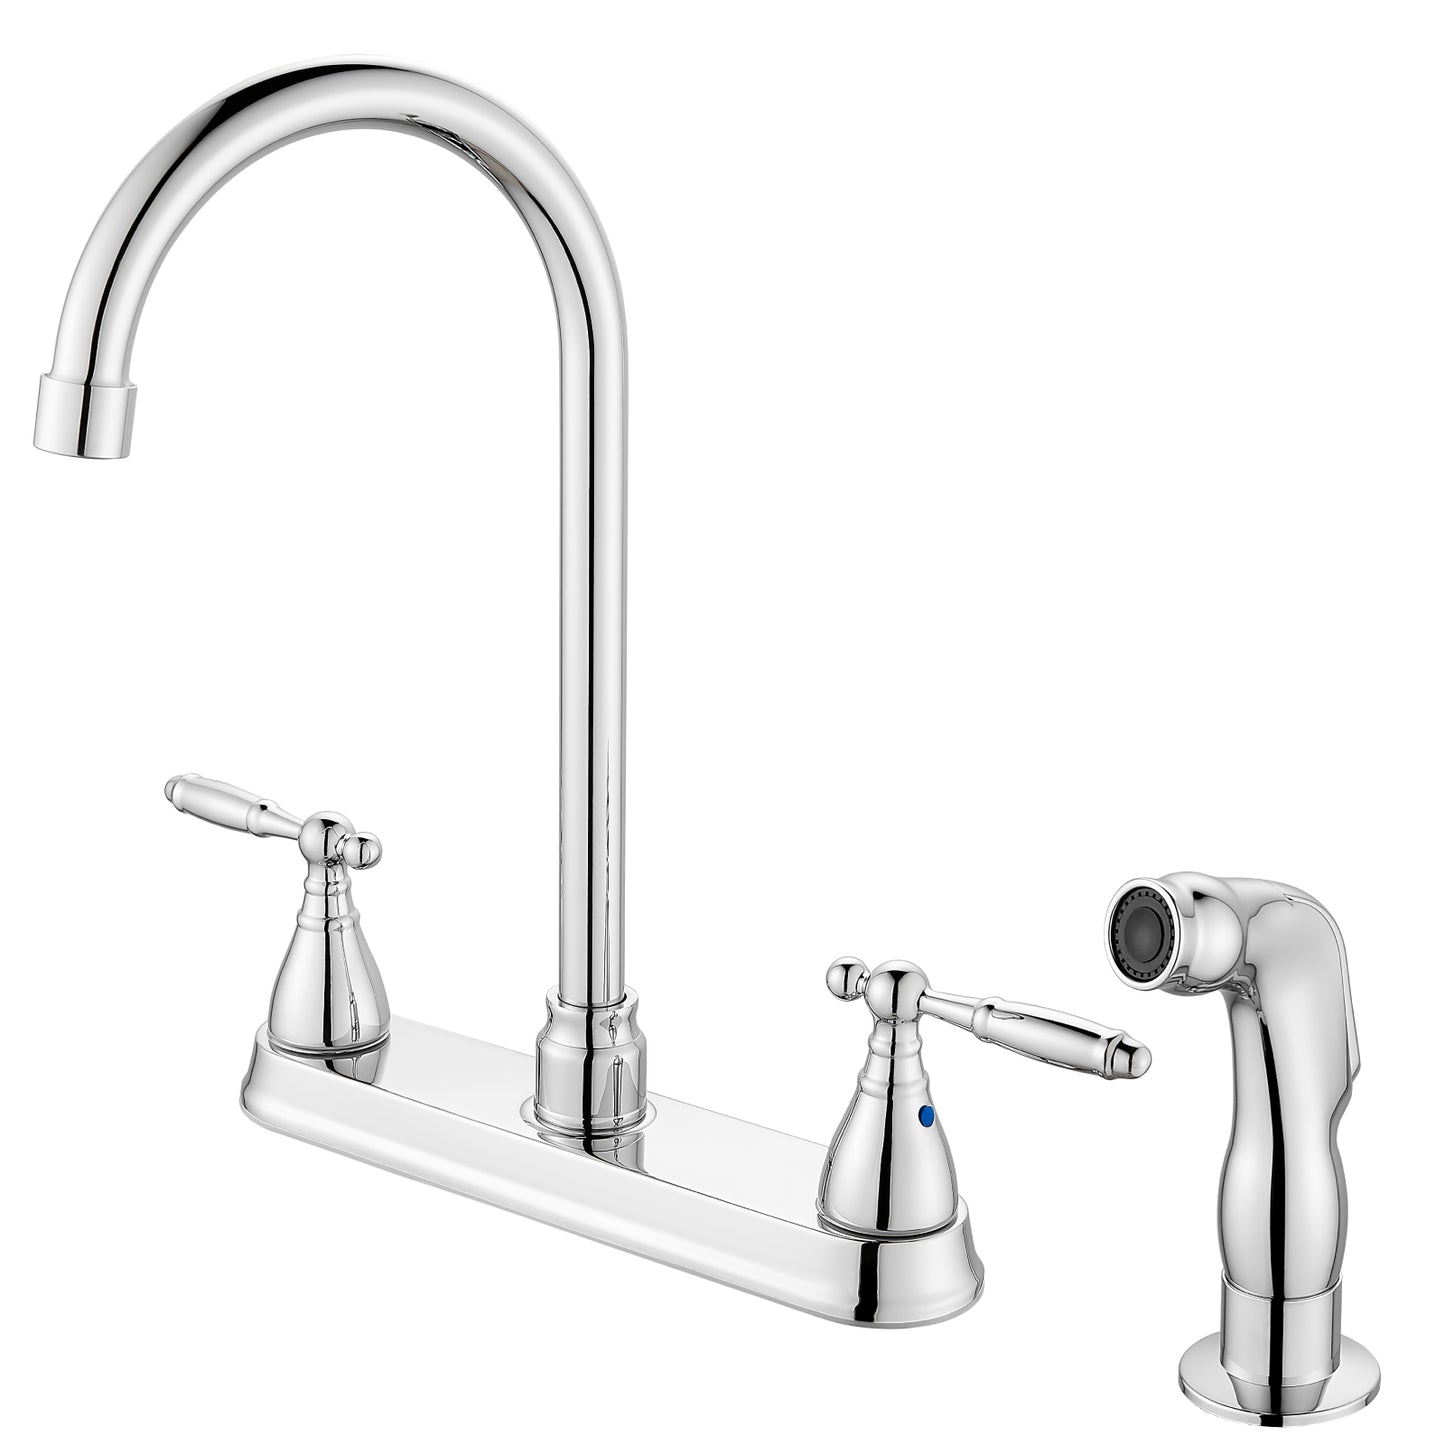 
                  
                    Cinwiny Kitchen Sink Faucet with Pull-Out Side Sprayer, High-Arc SUS304 360° Rotating Spout 2-Handle 8 Inch Centerset Kitchen Faucet with Supply Lines
                  
                